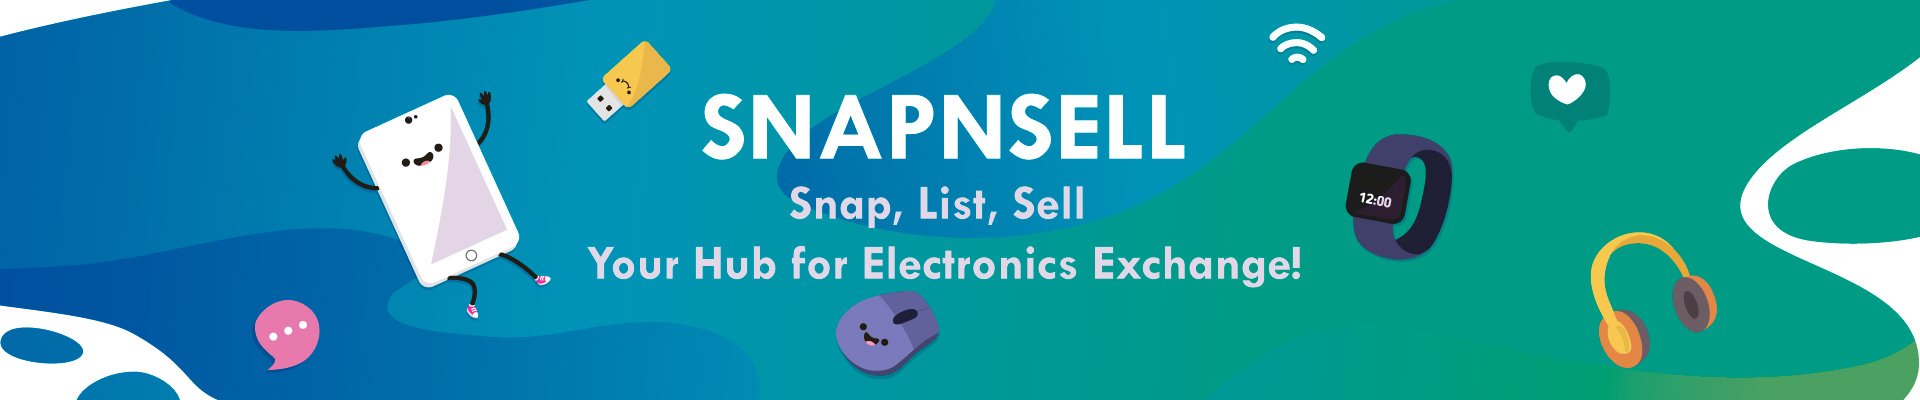 Snap, List, Sell – Your Hub for Electronics Exchange!